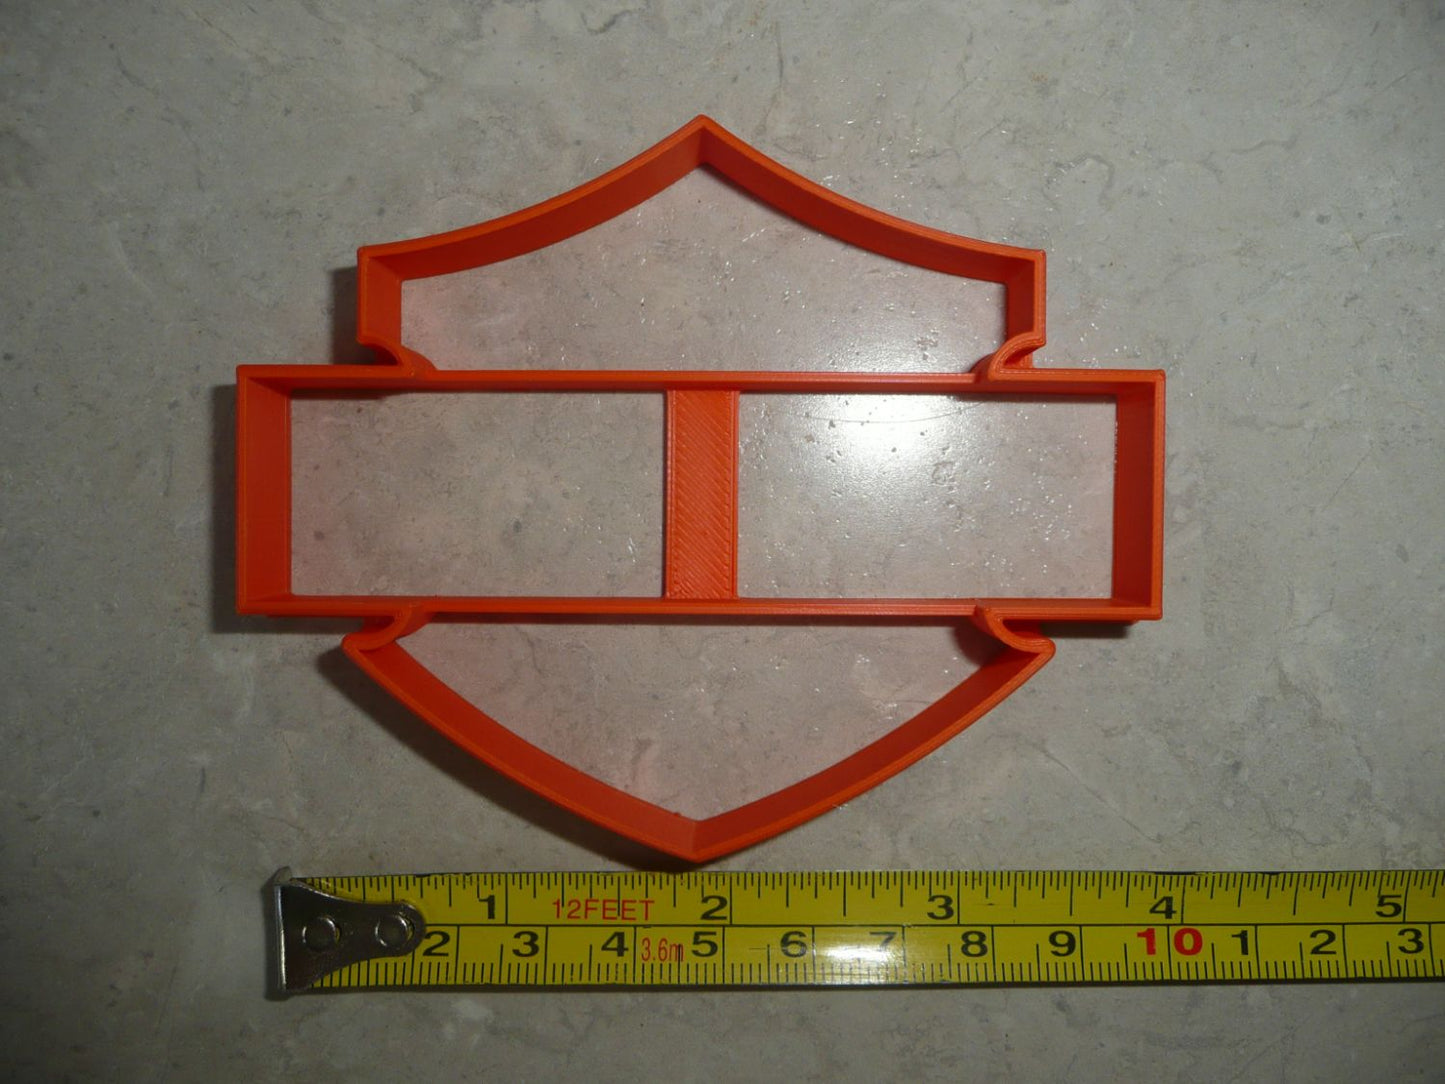 Harley Davidson Luxury Motorcycle Iconic Symbol Cookie Cutter Made In USA PR4538